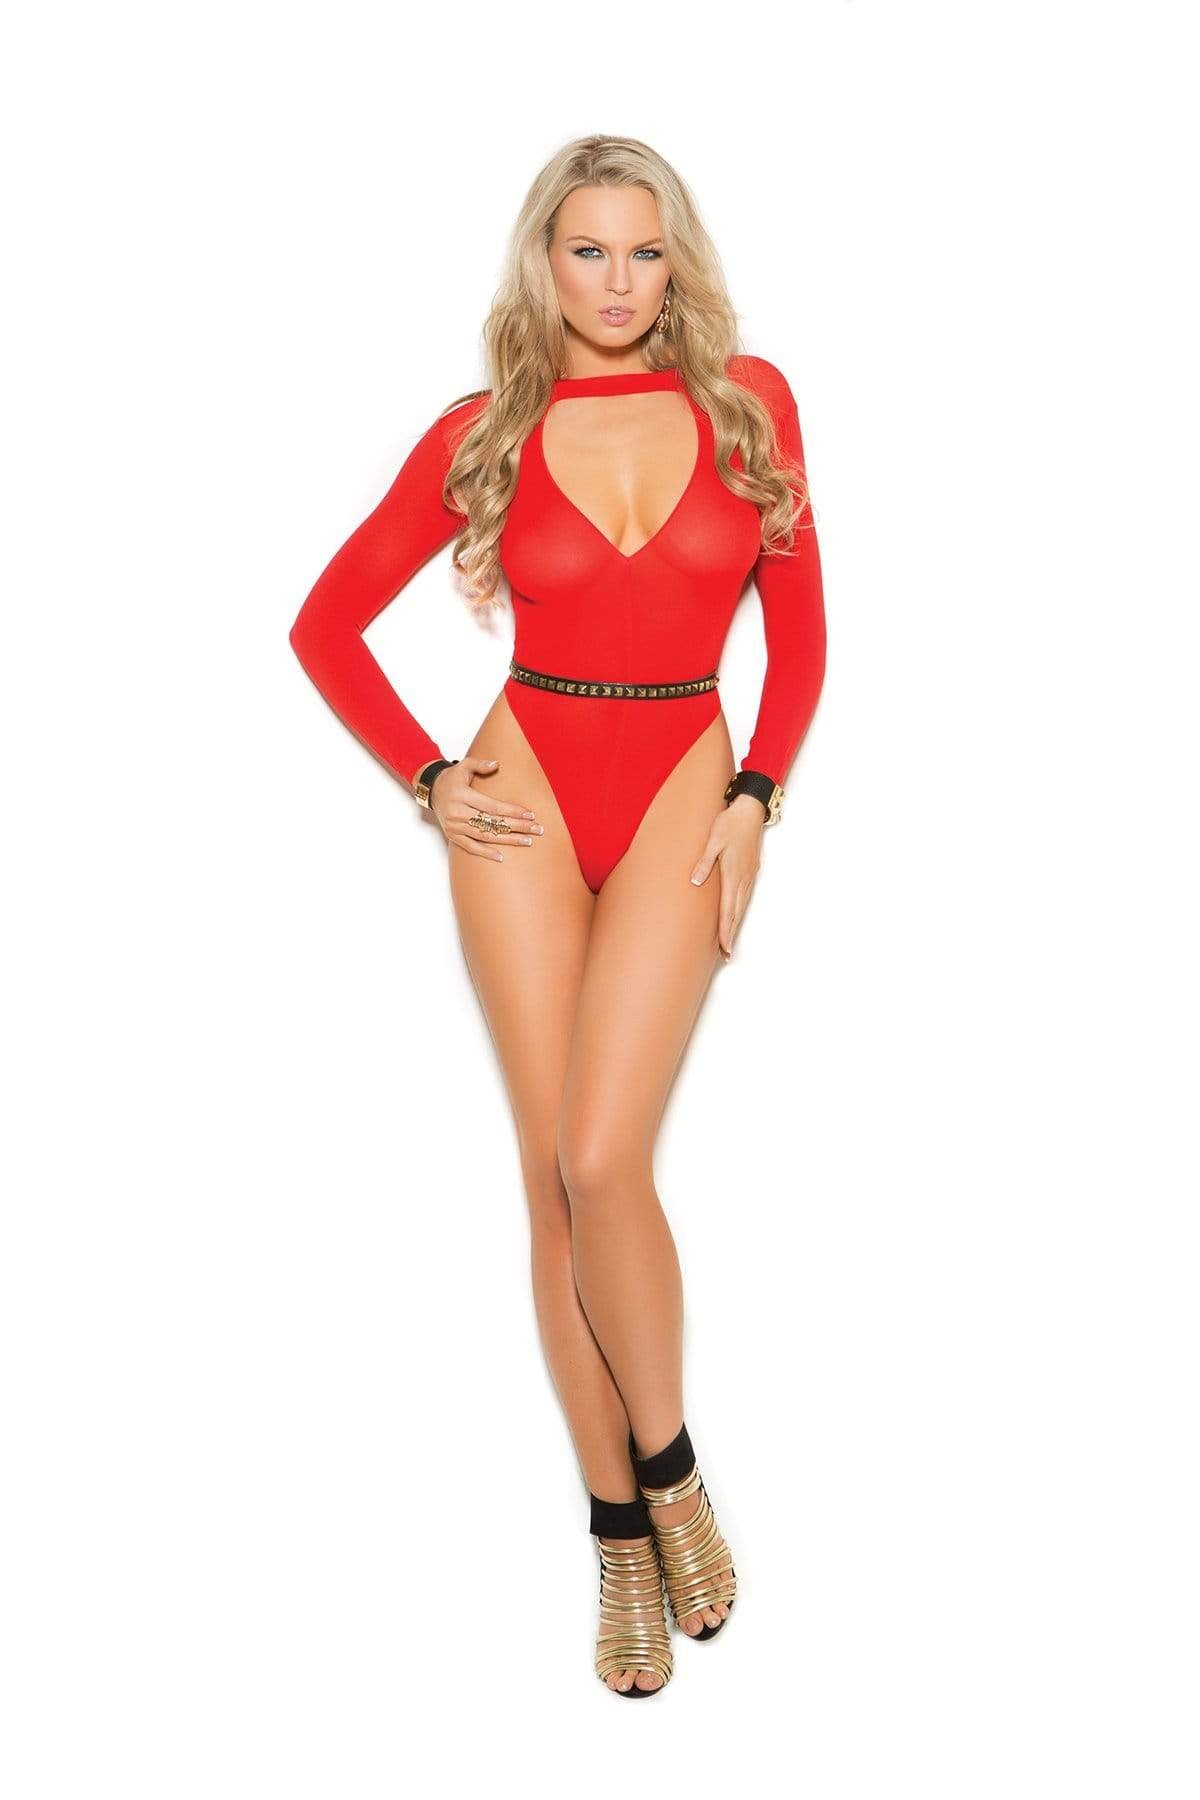 Elegant Moments One Size / Red Sexy Red Sheer Keyhole Long Sleeve Cheeky Bodysuit SHC-1275-RED-O/S-EB Sexy Black Sheer Fishnet Teddy Mesh Bodysuit Festival Lingerie Dance Apparel & Accessories > Clothing > Underwear & Socks > Lingerie